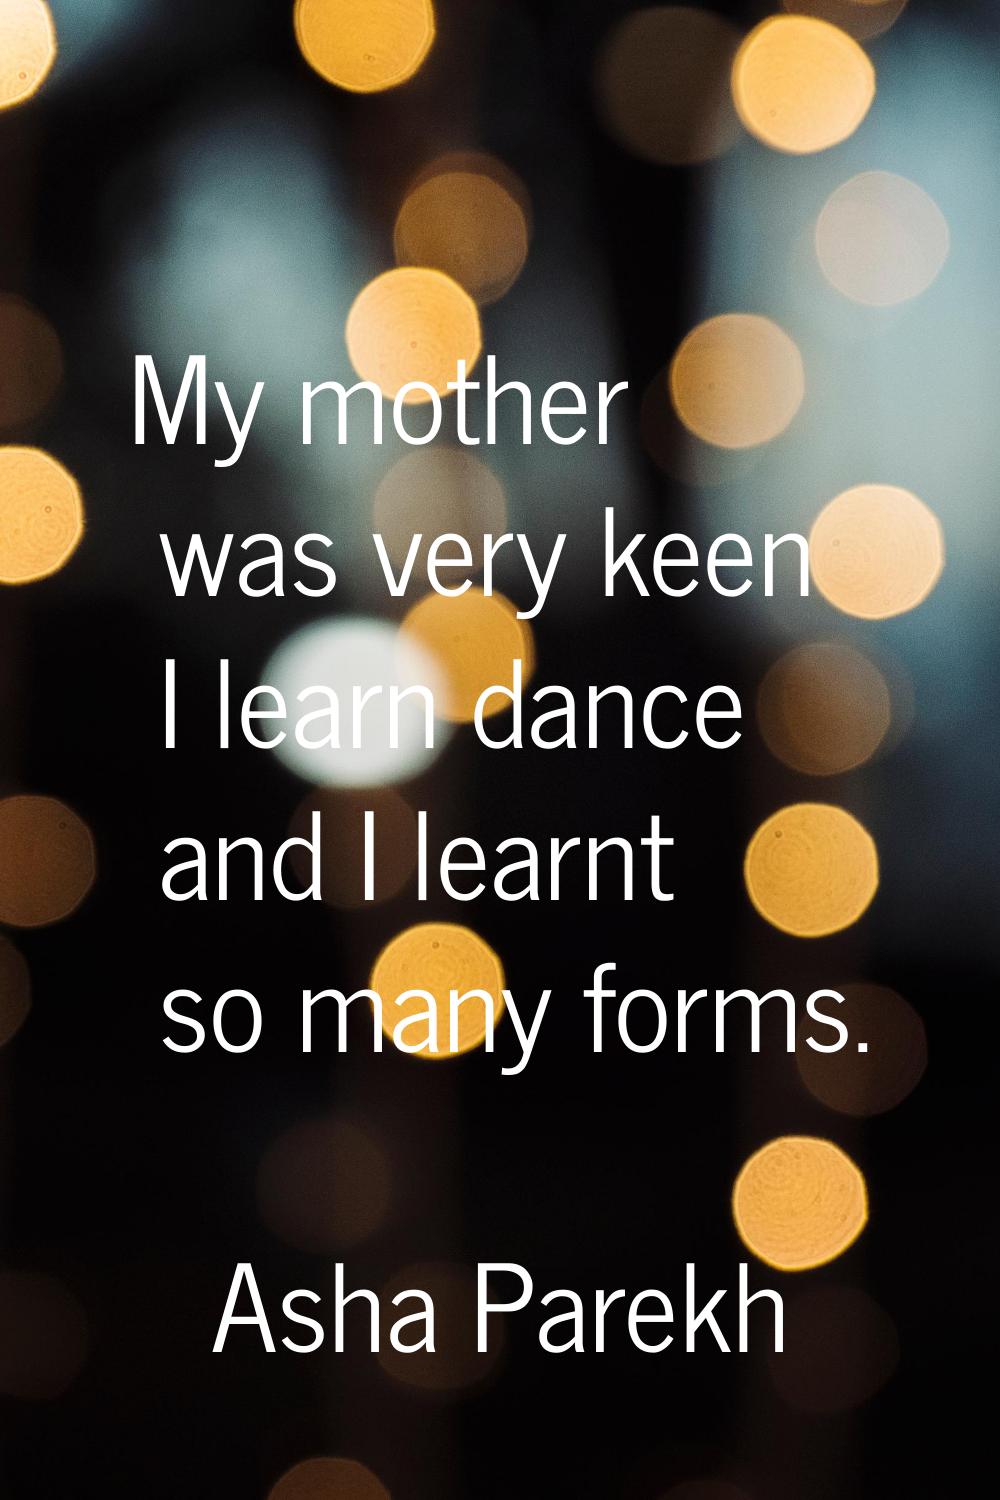 My mother was very keen I learn dance and I learnt so many forms.